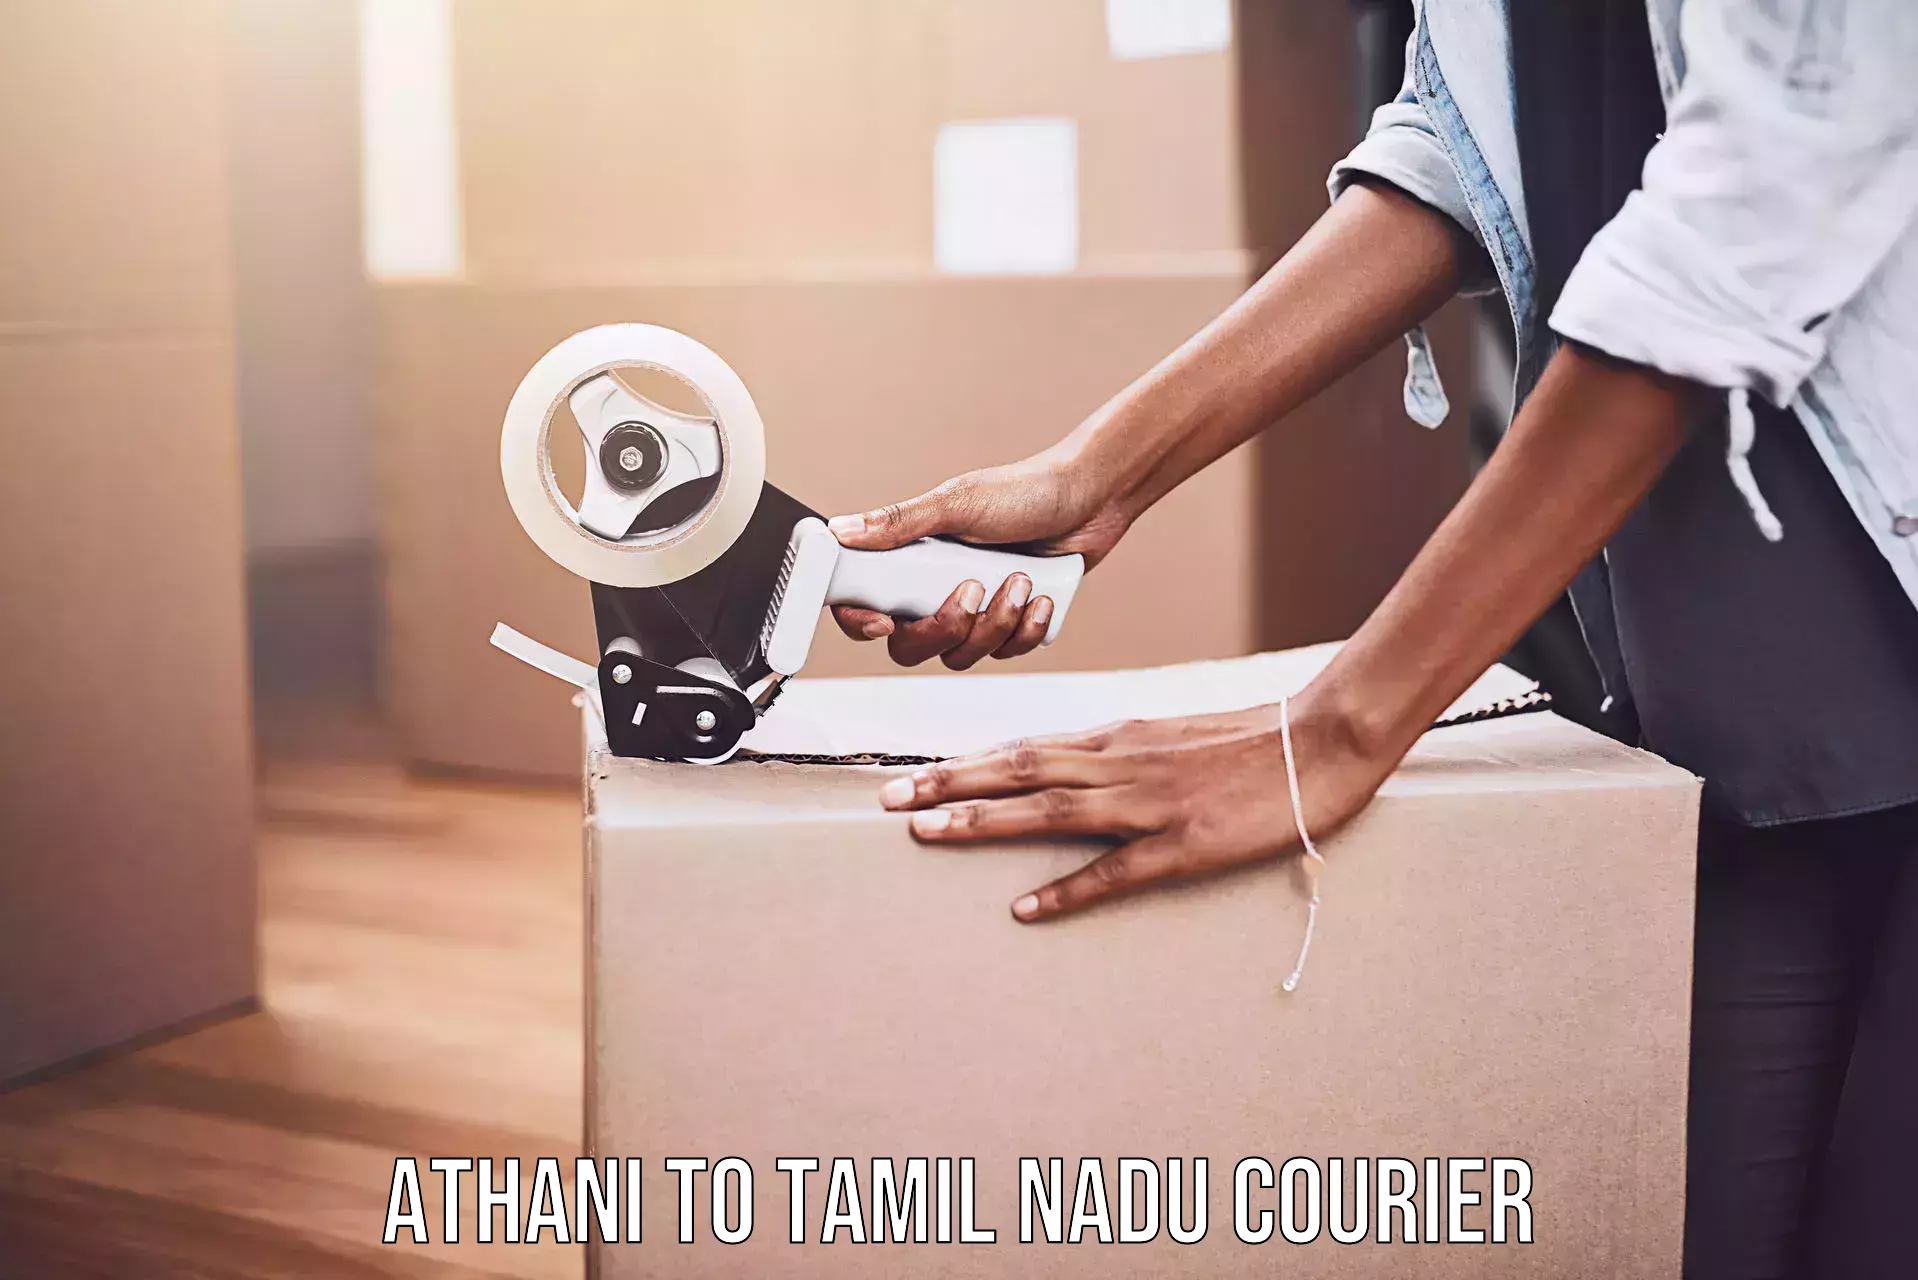 Courier service partnerships in Athani to Tamil Nadu